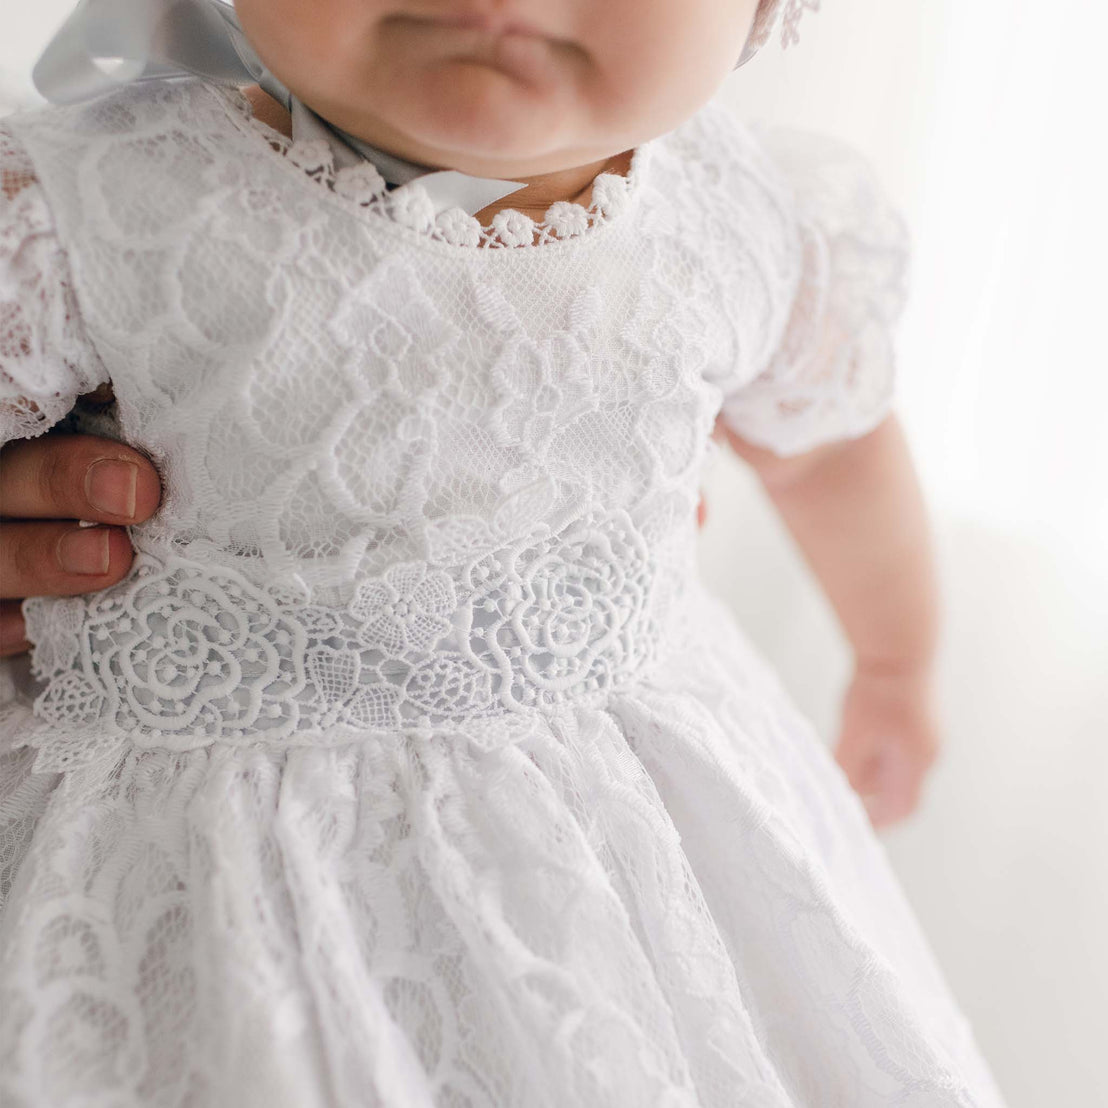 A close-up of a baby in an Olivia Dress, being held by an adult, focusing on the intricate heirloom details of the fabric and the baby's plump arm.